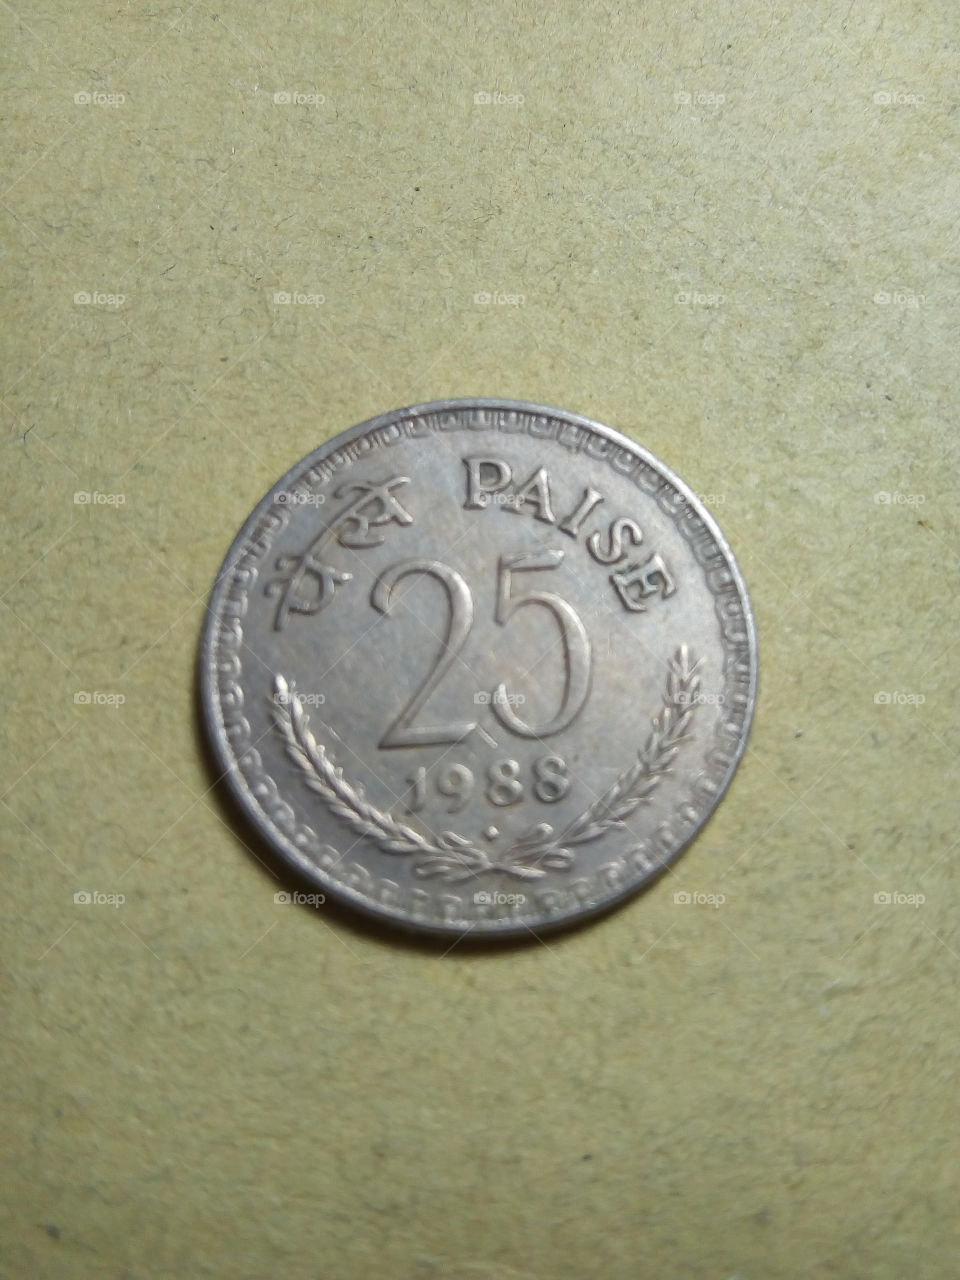 A coin of Twenty Five paise- 1/4 share of Indian Rupee issued by Government of India in 1988.